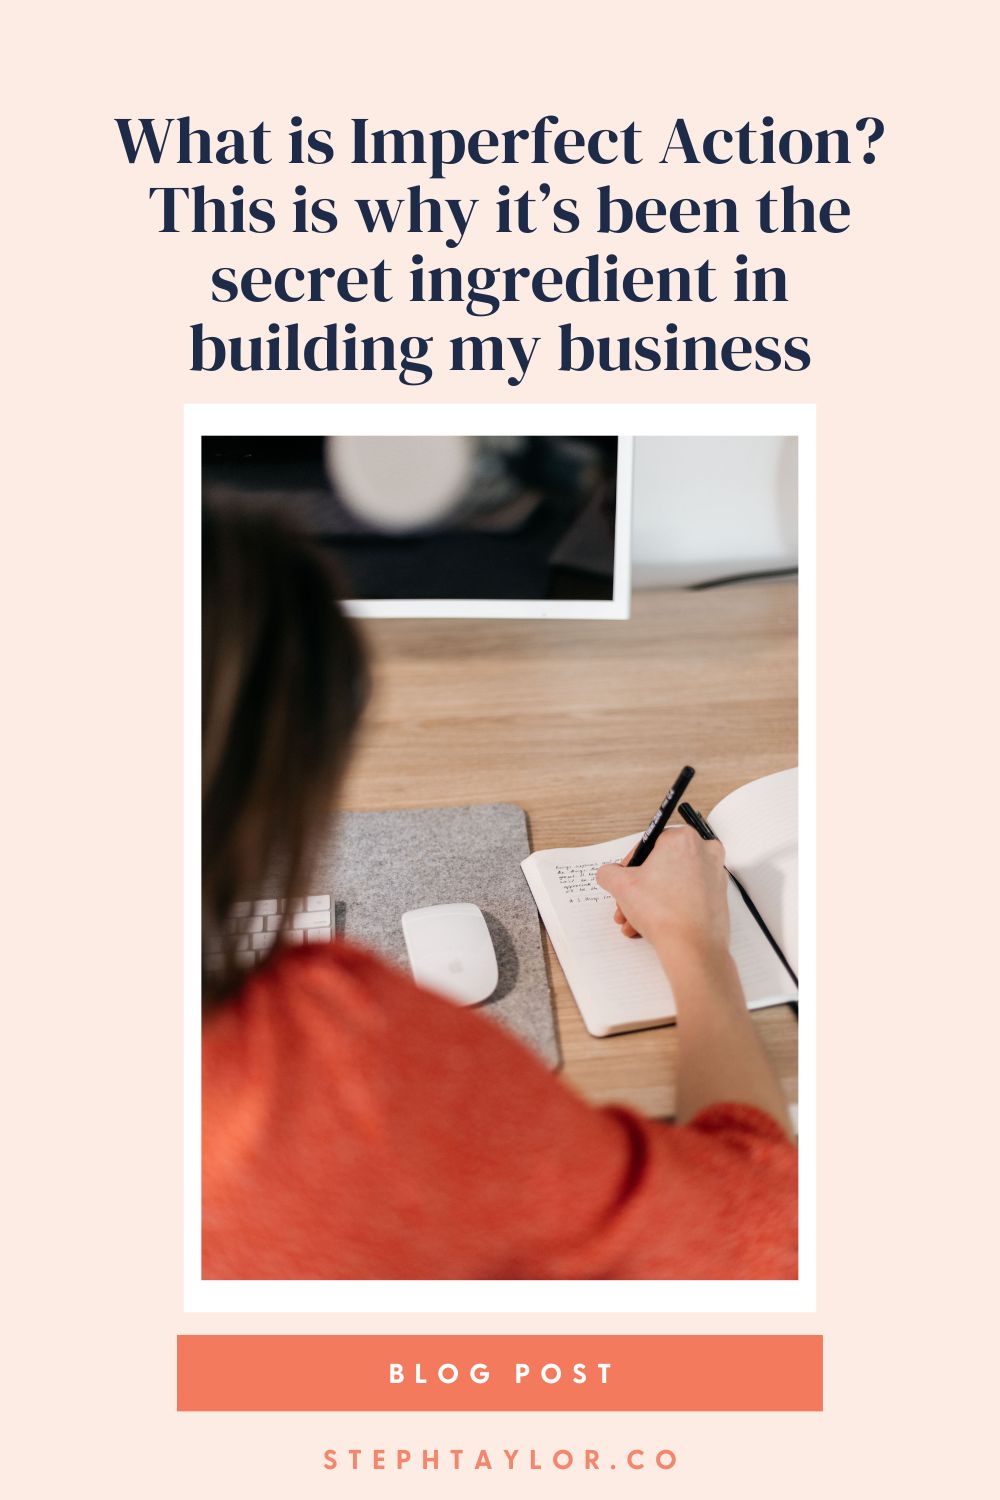 What is Imperfect Action? This is why it’s been the secret ingredient in building my business